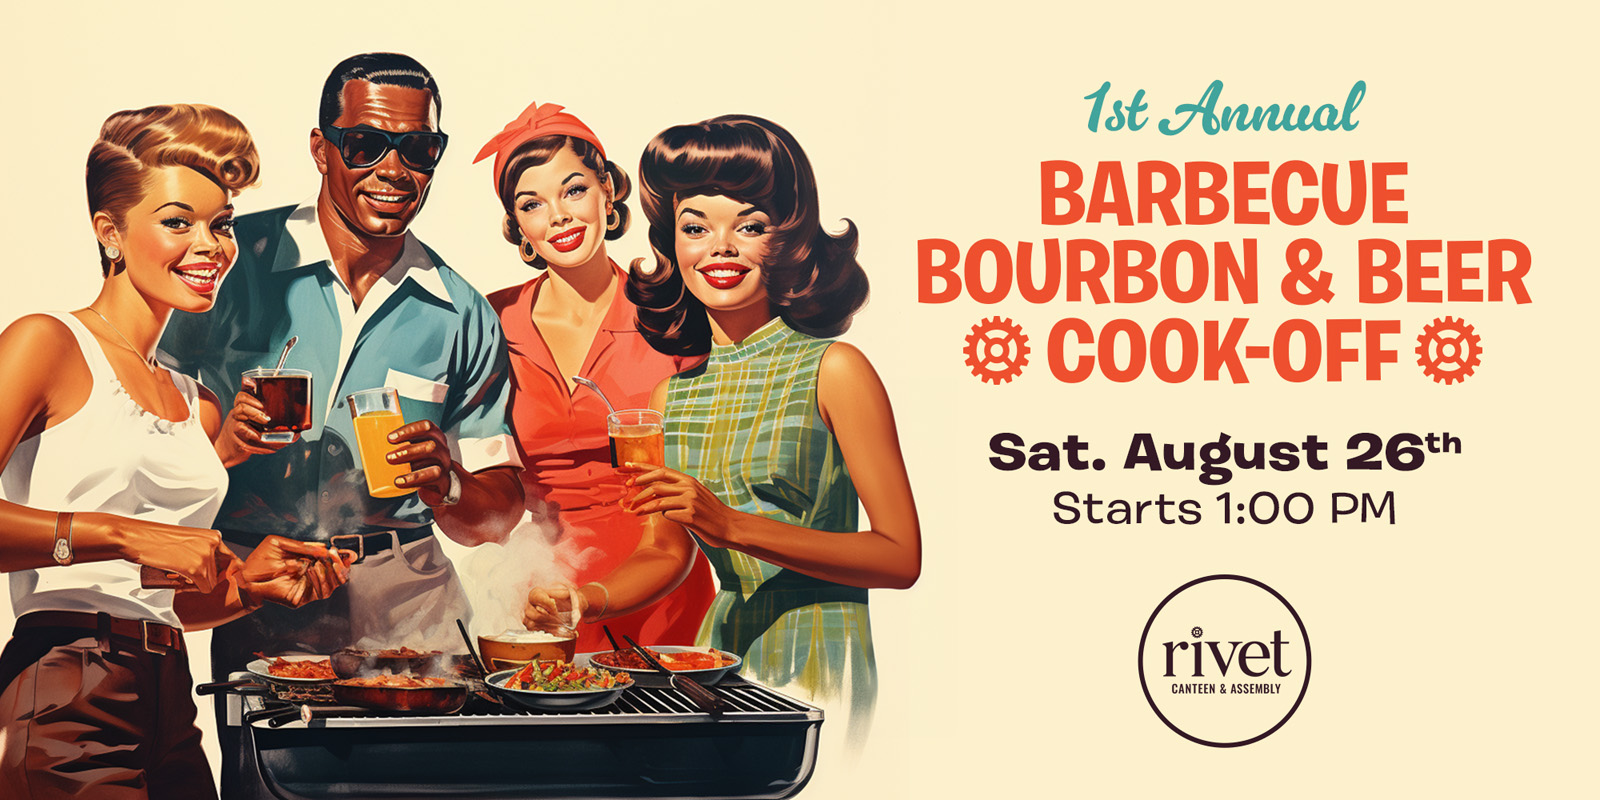 Get fired up for Rivet's 1st Annual Barbecue, Bourbon & Beer Cook-Off on Saturday, August 26th! Grilling battles, drinks, music, and fun for the whole family!